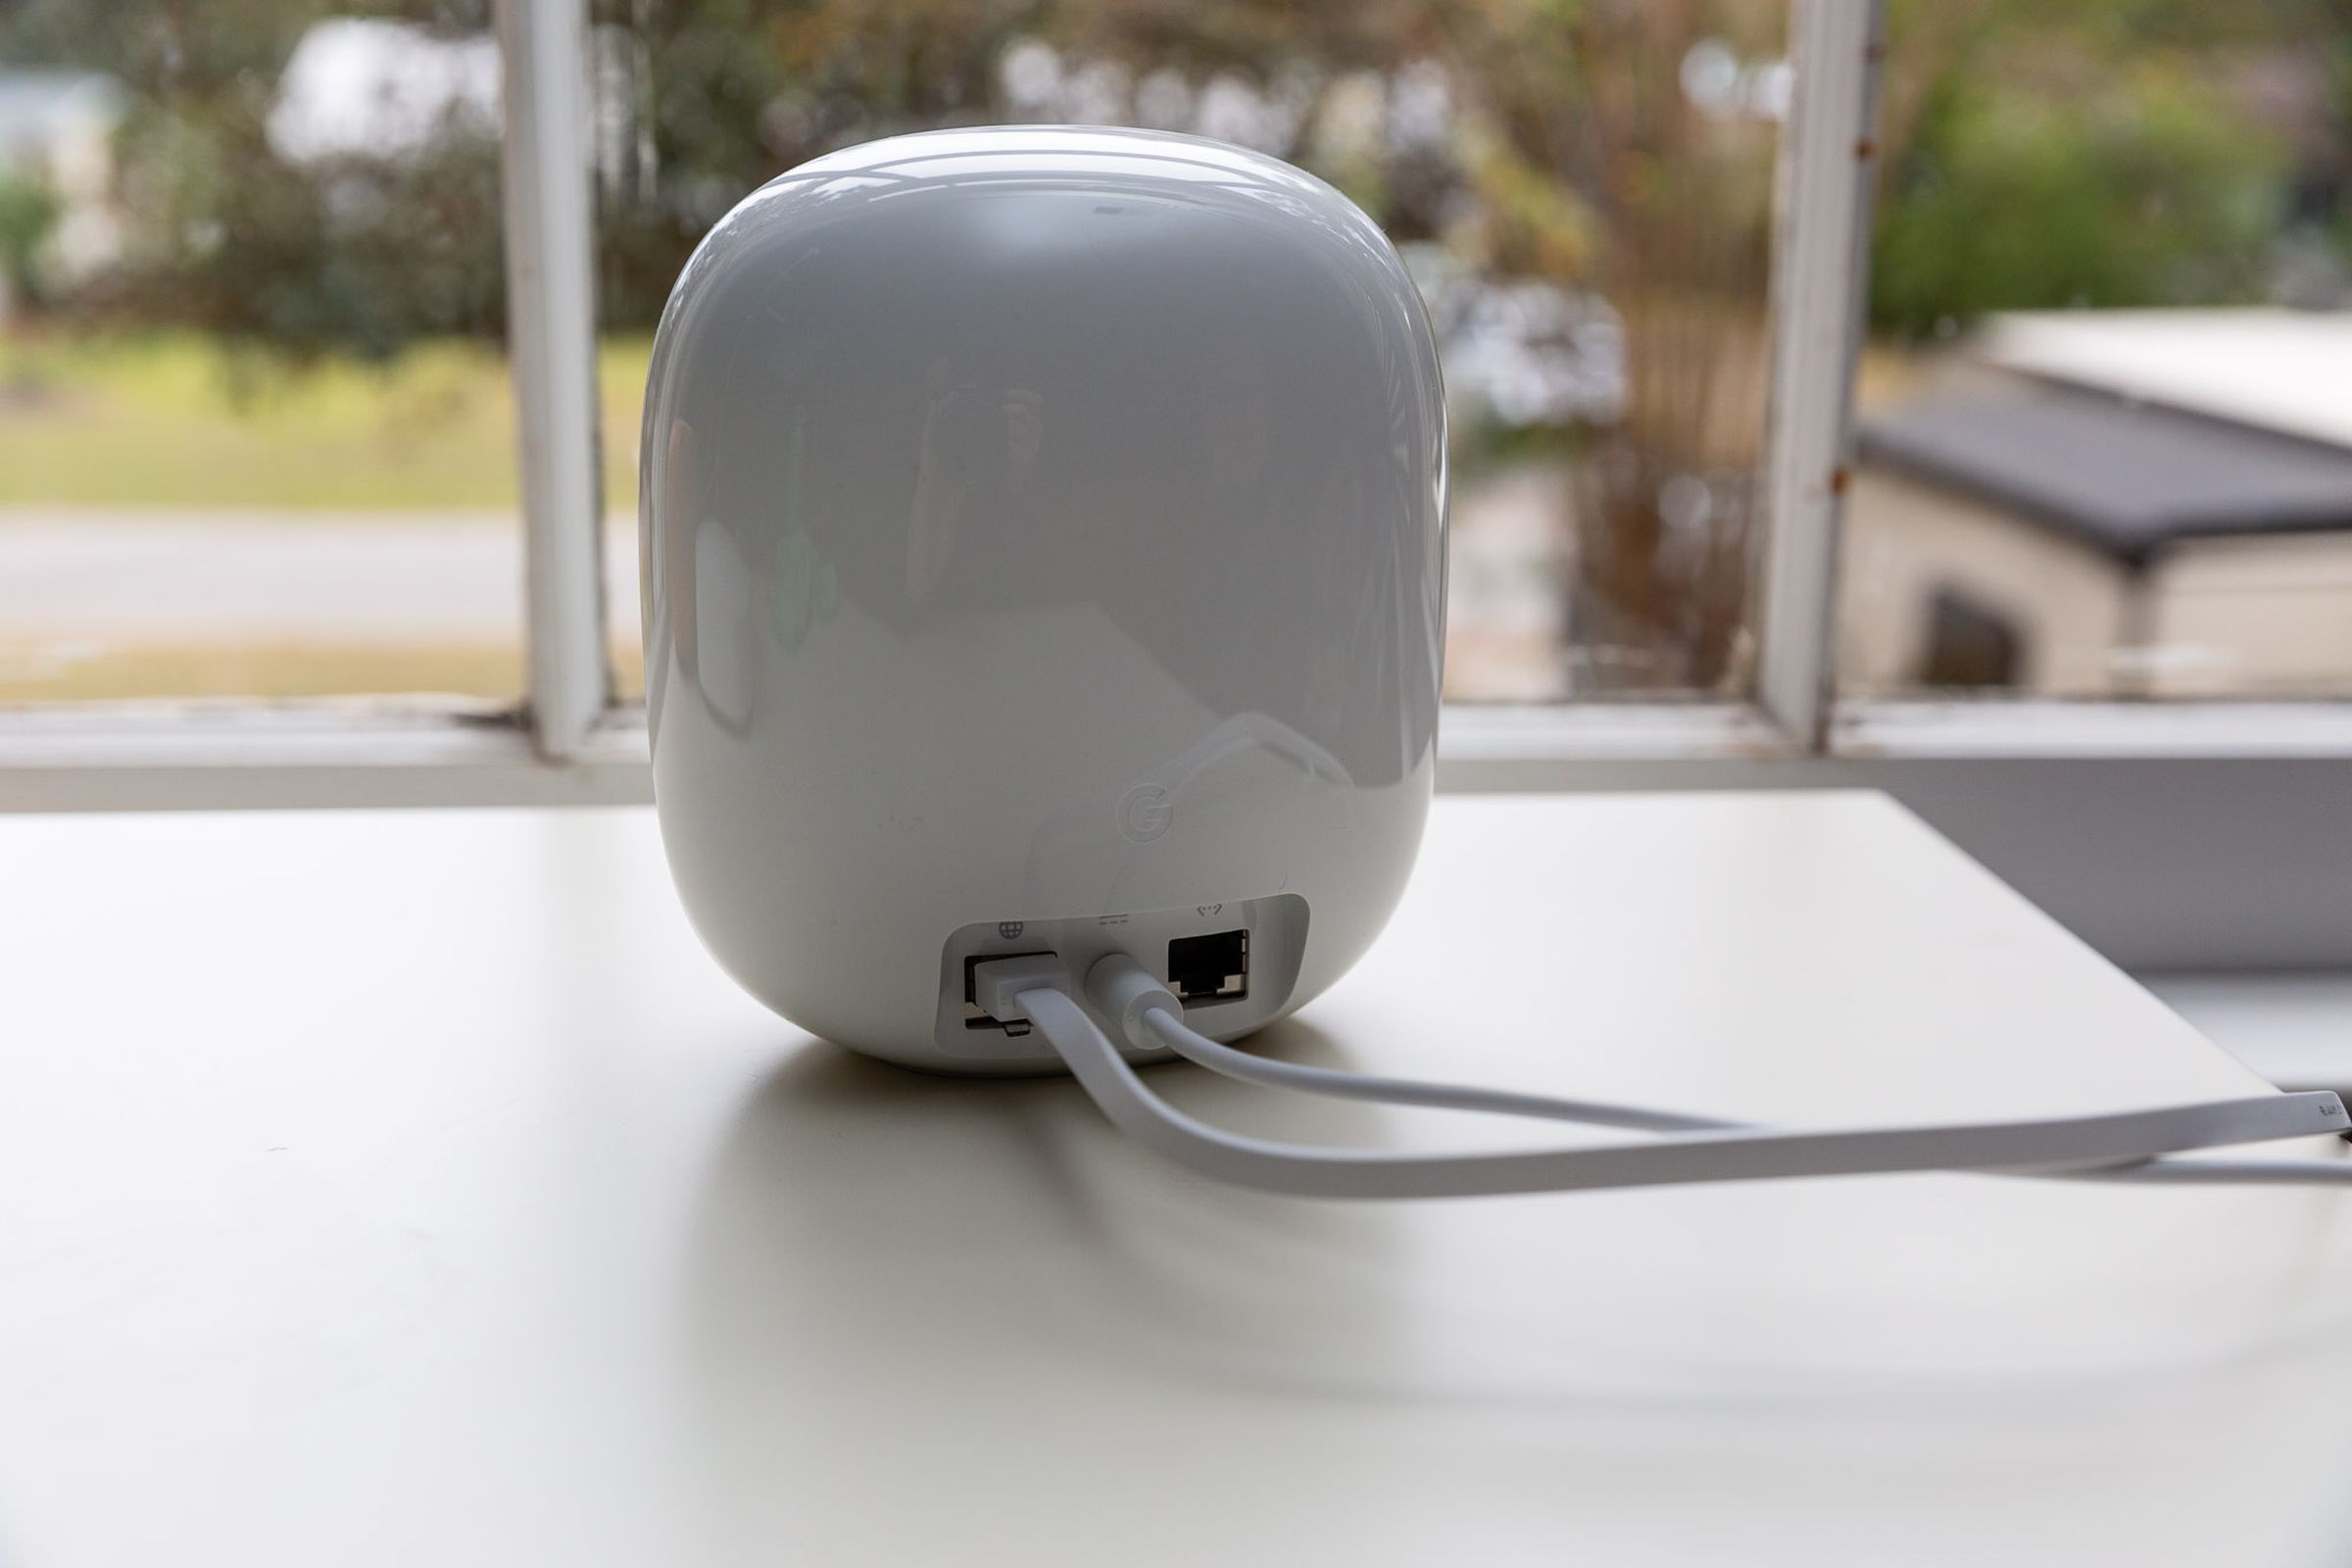 The back of a Nest Wifi Pro router on a table next to a window.